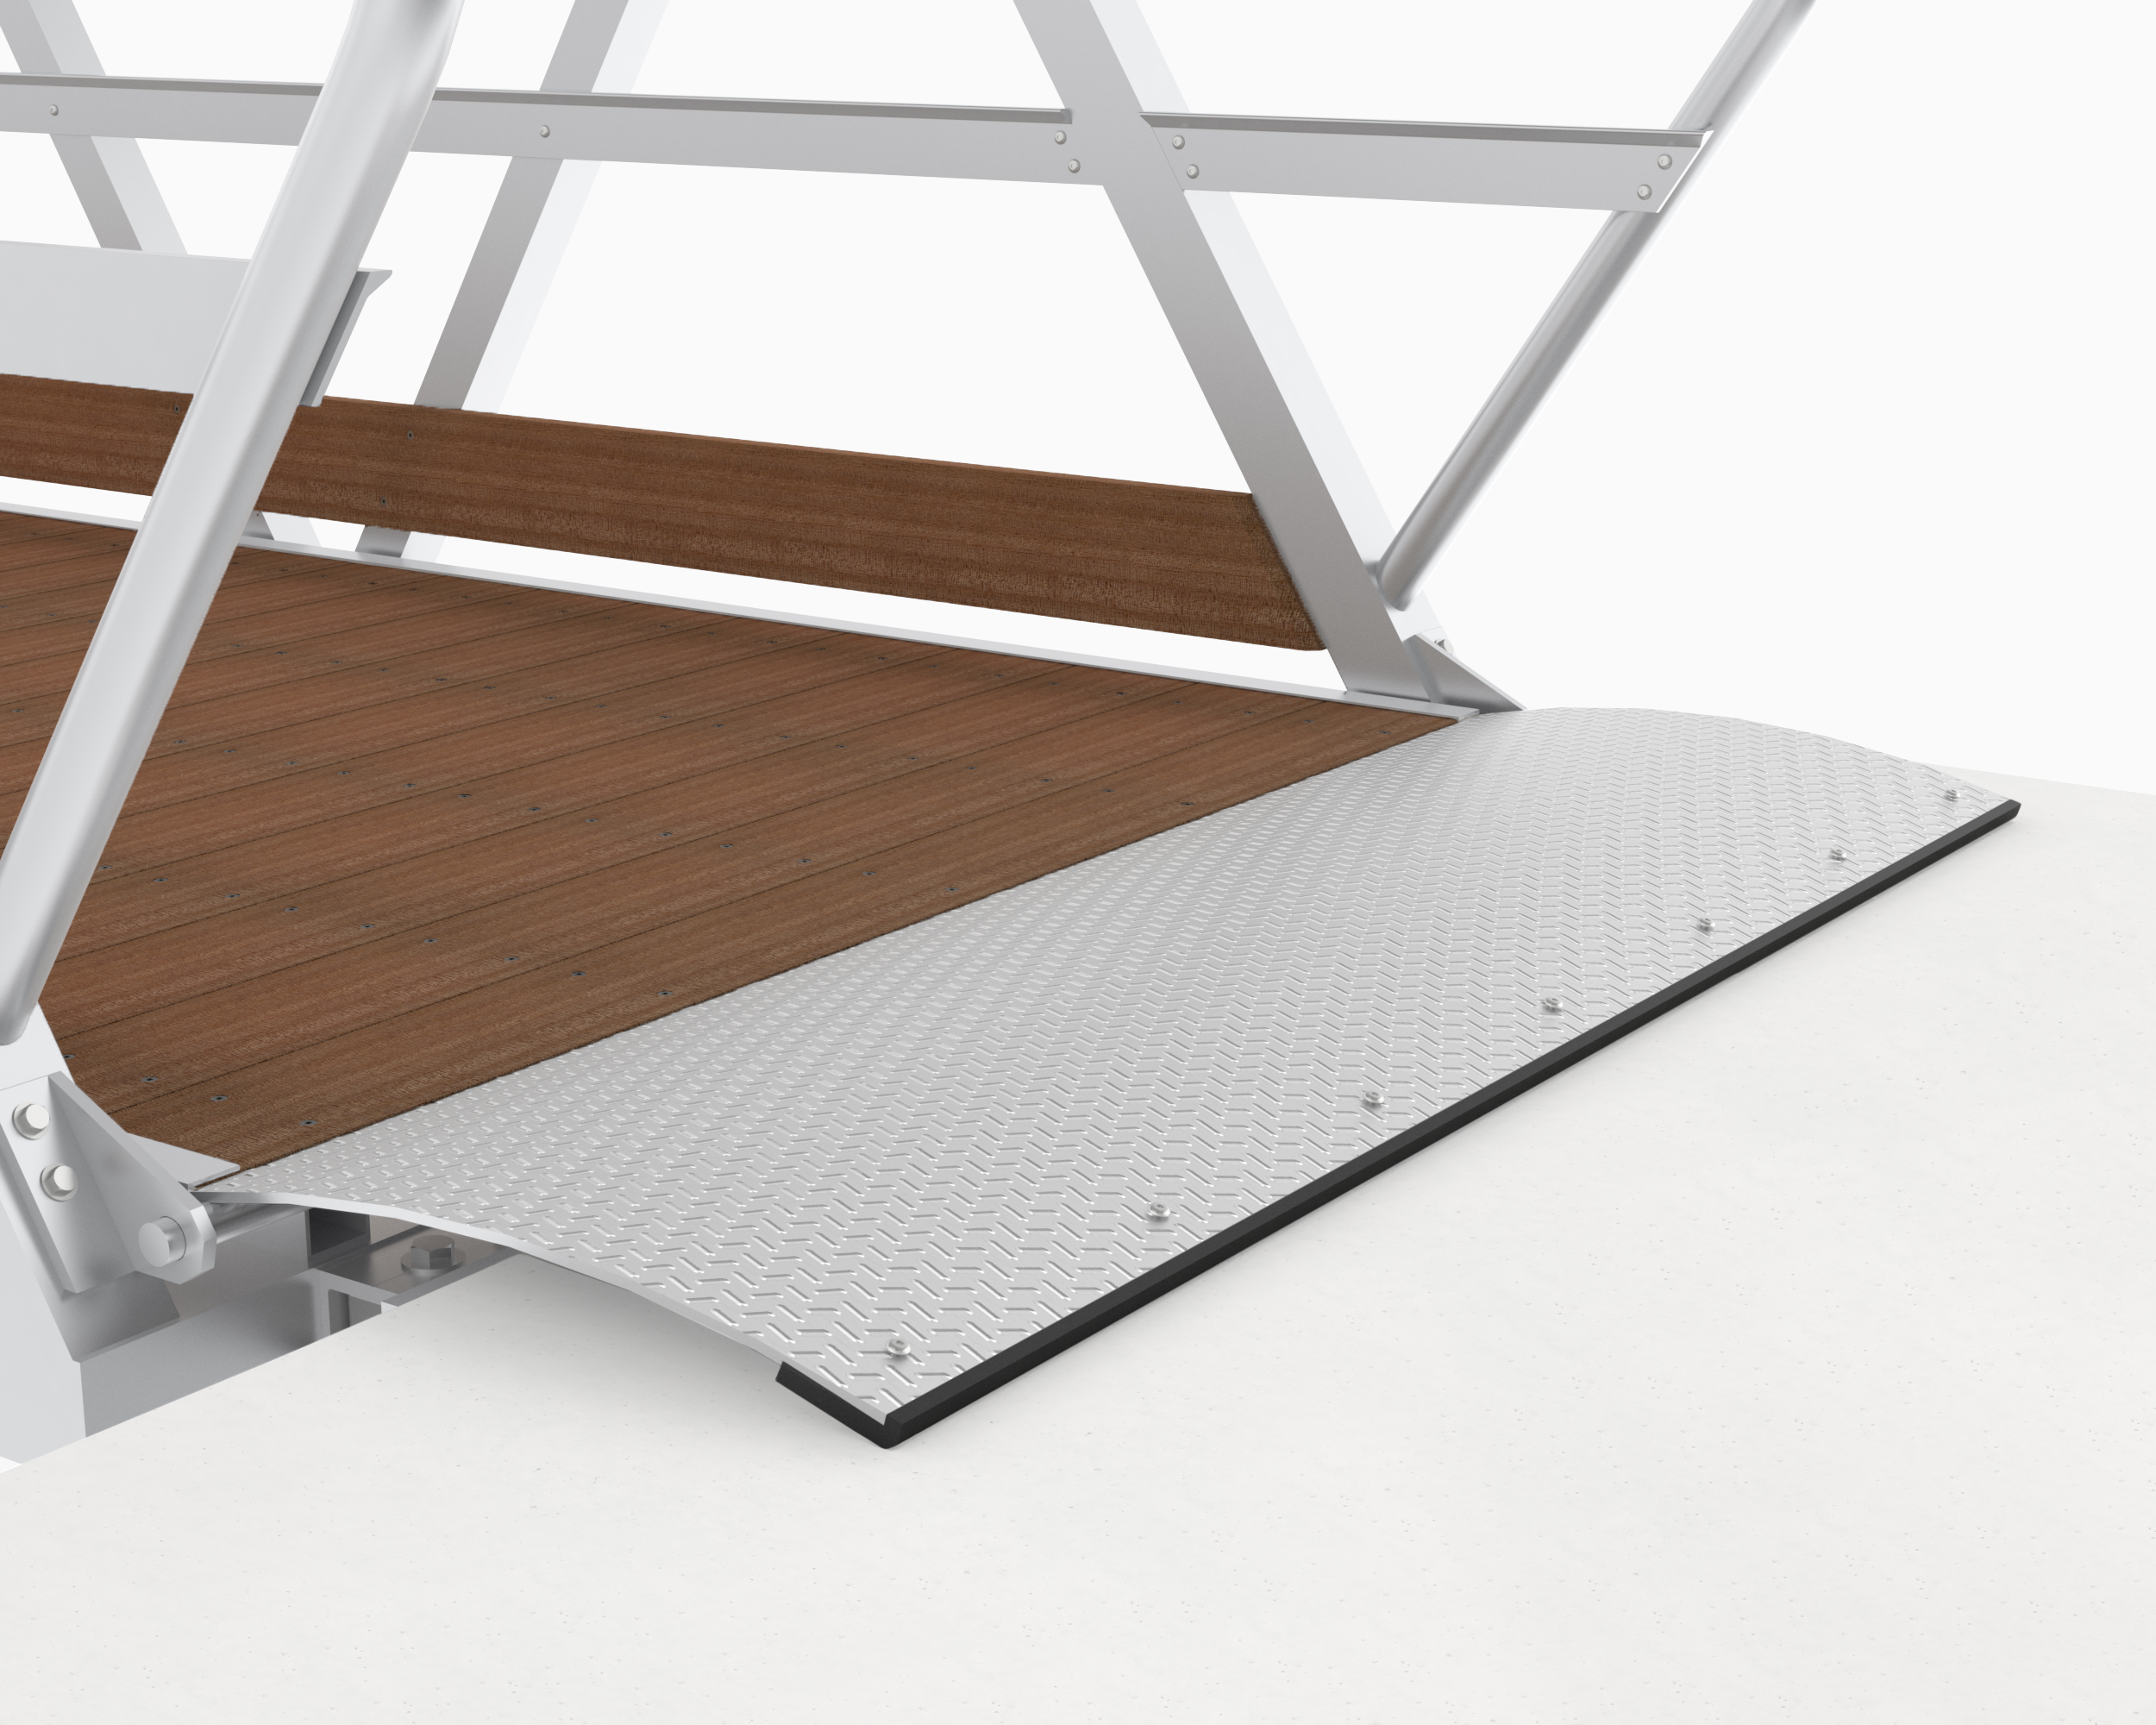 Curved transition plate with diamond treads for custom gangway